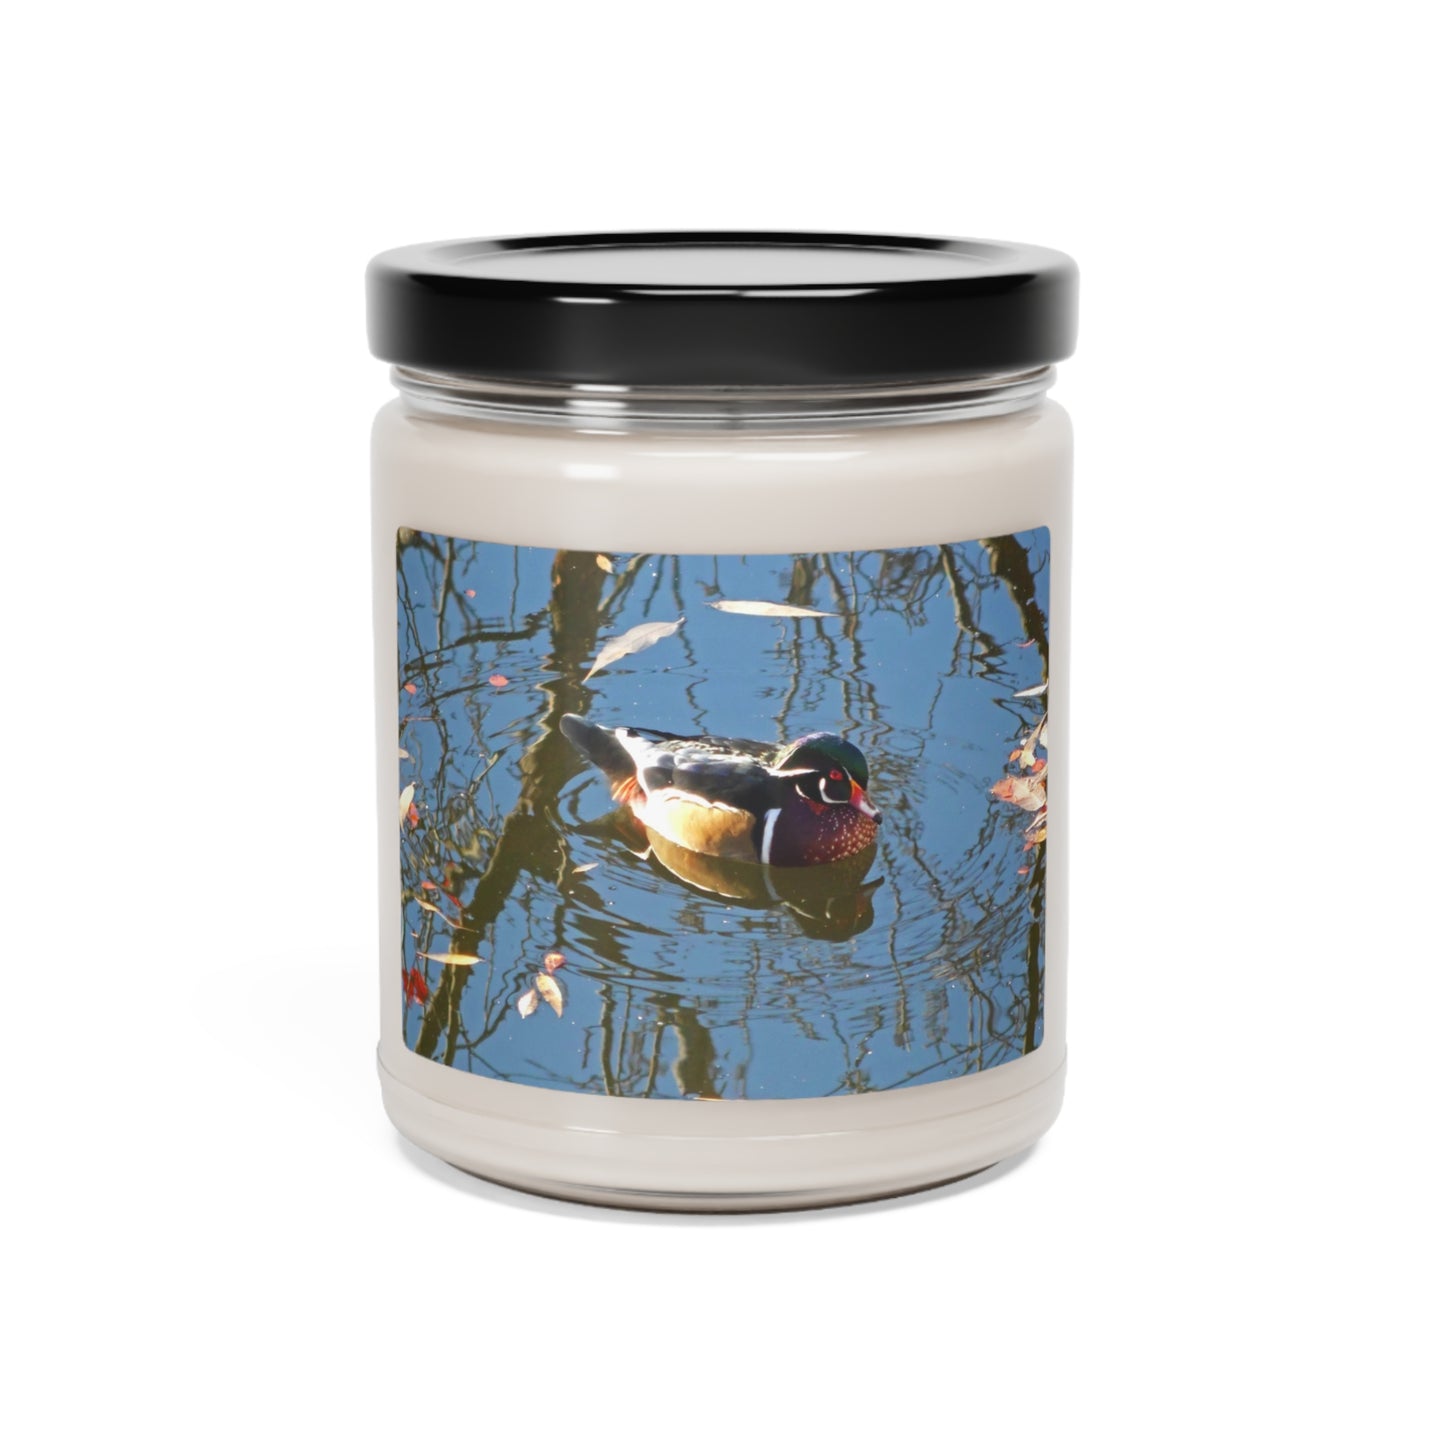 Reflections Wood Duck Scented Soy Candle, 9oz